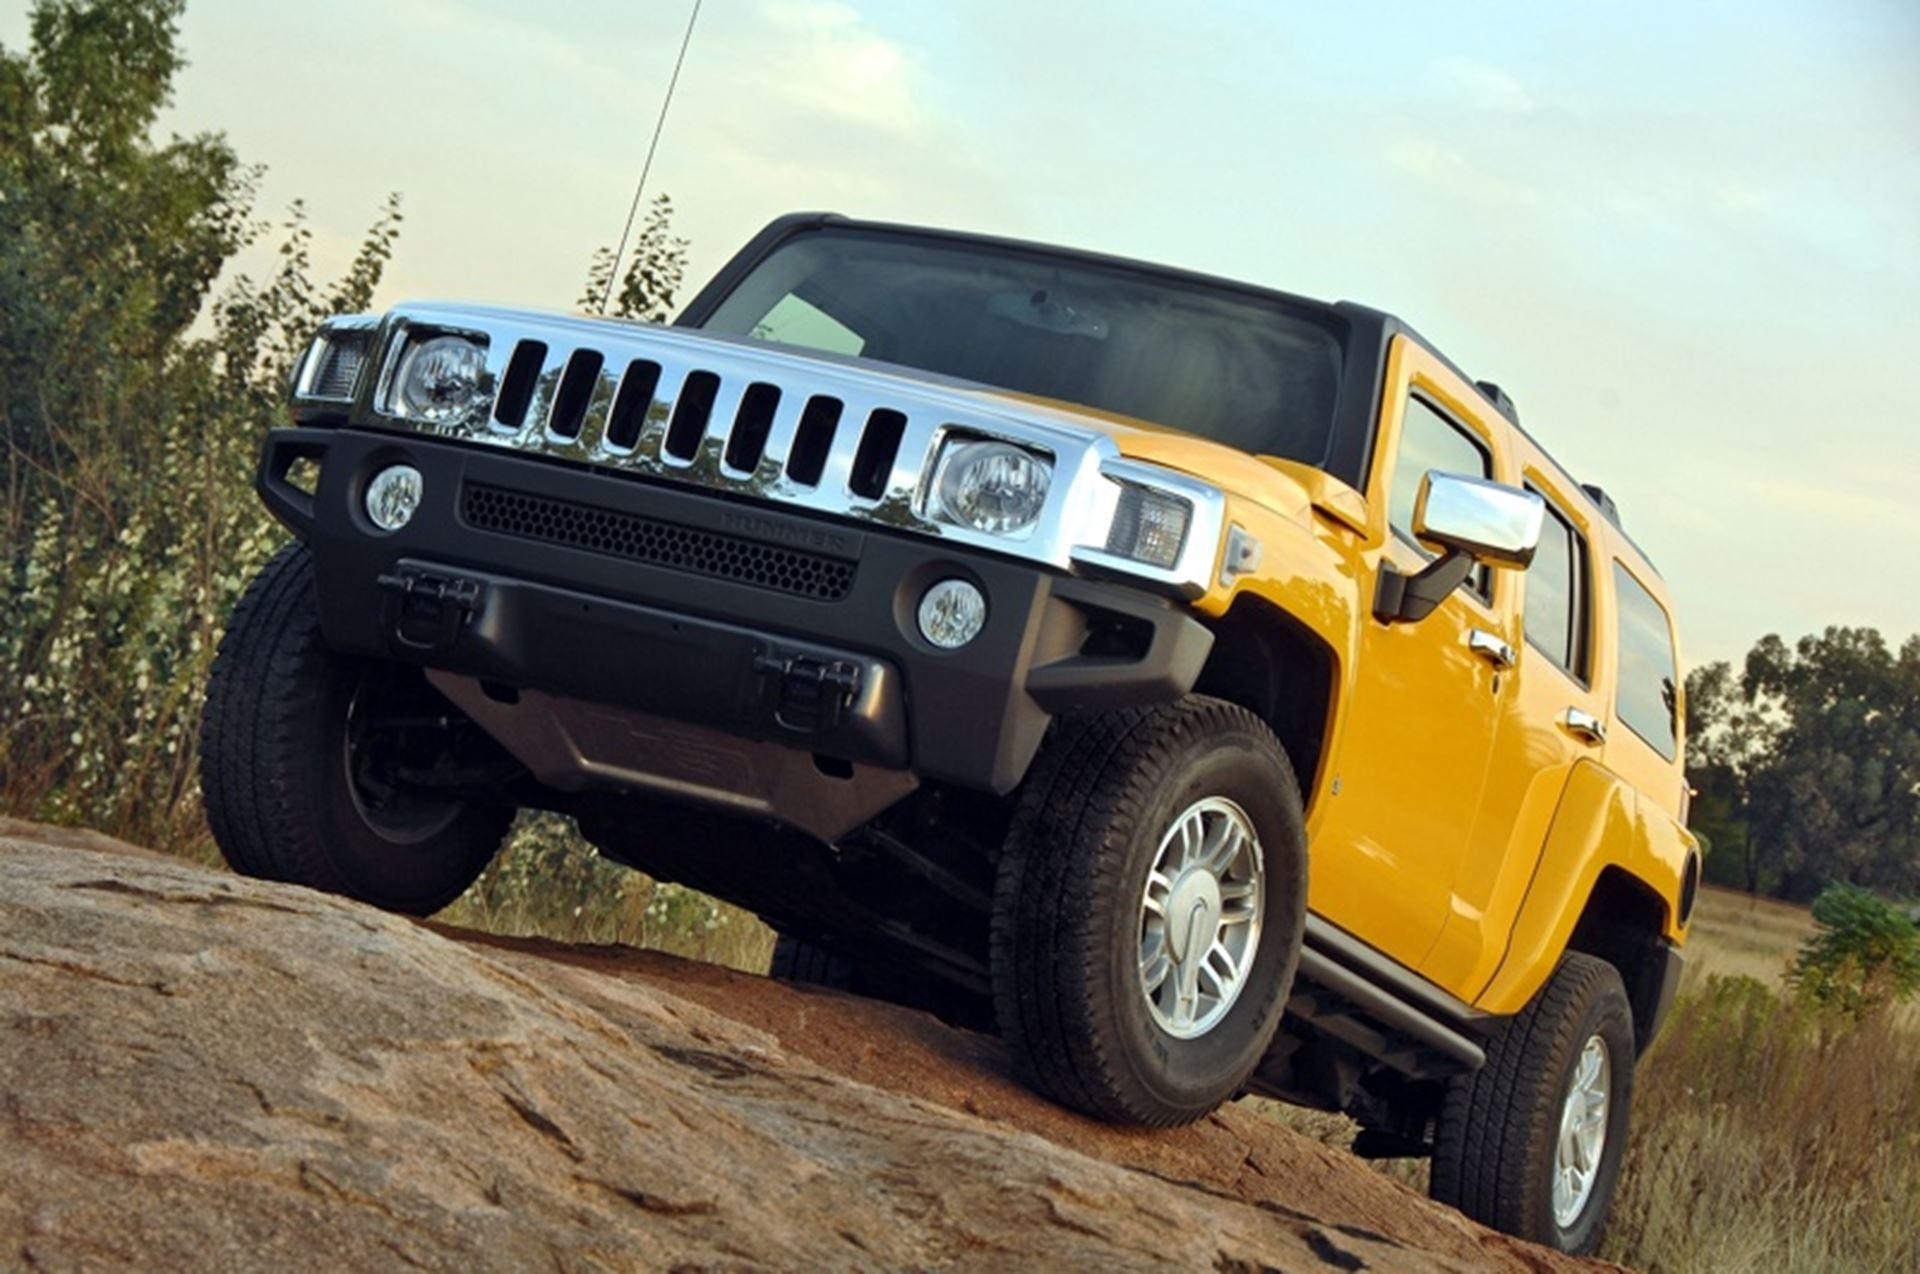 Hummer H3, Auto, Iconic Hummer Styling, 1920x1280 HD Desktop